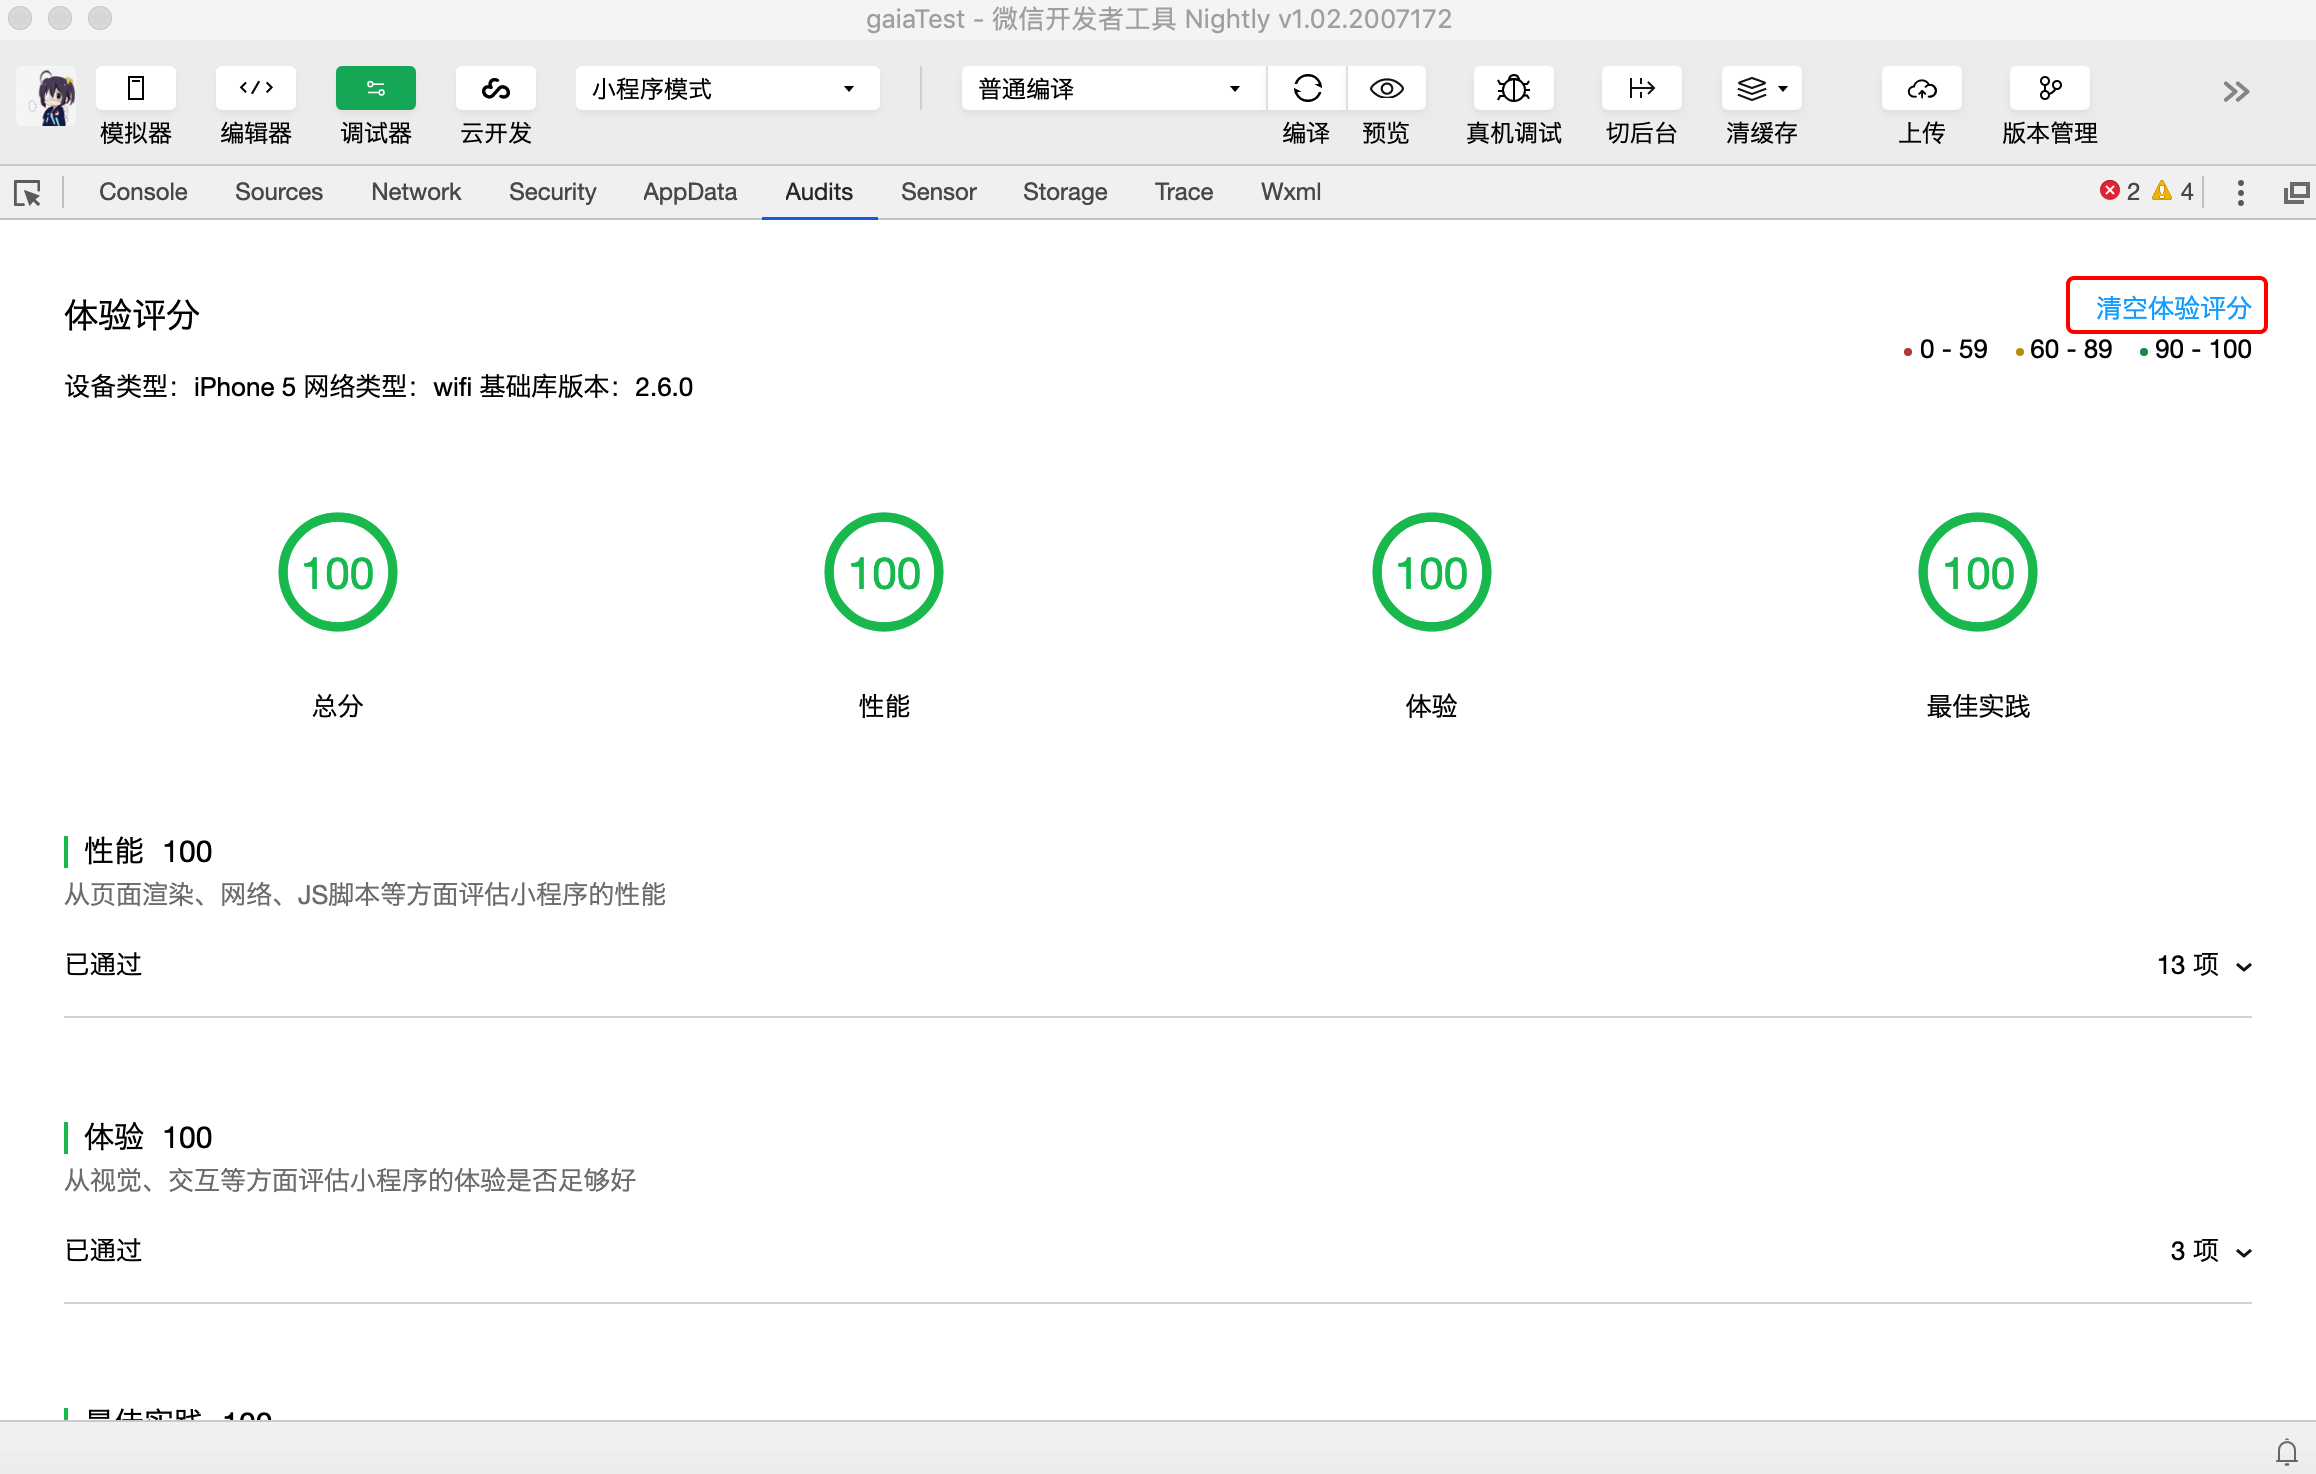 WeChat Gadget Experience Rating